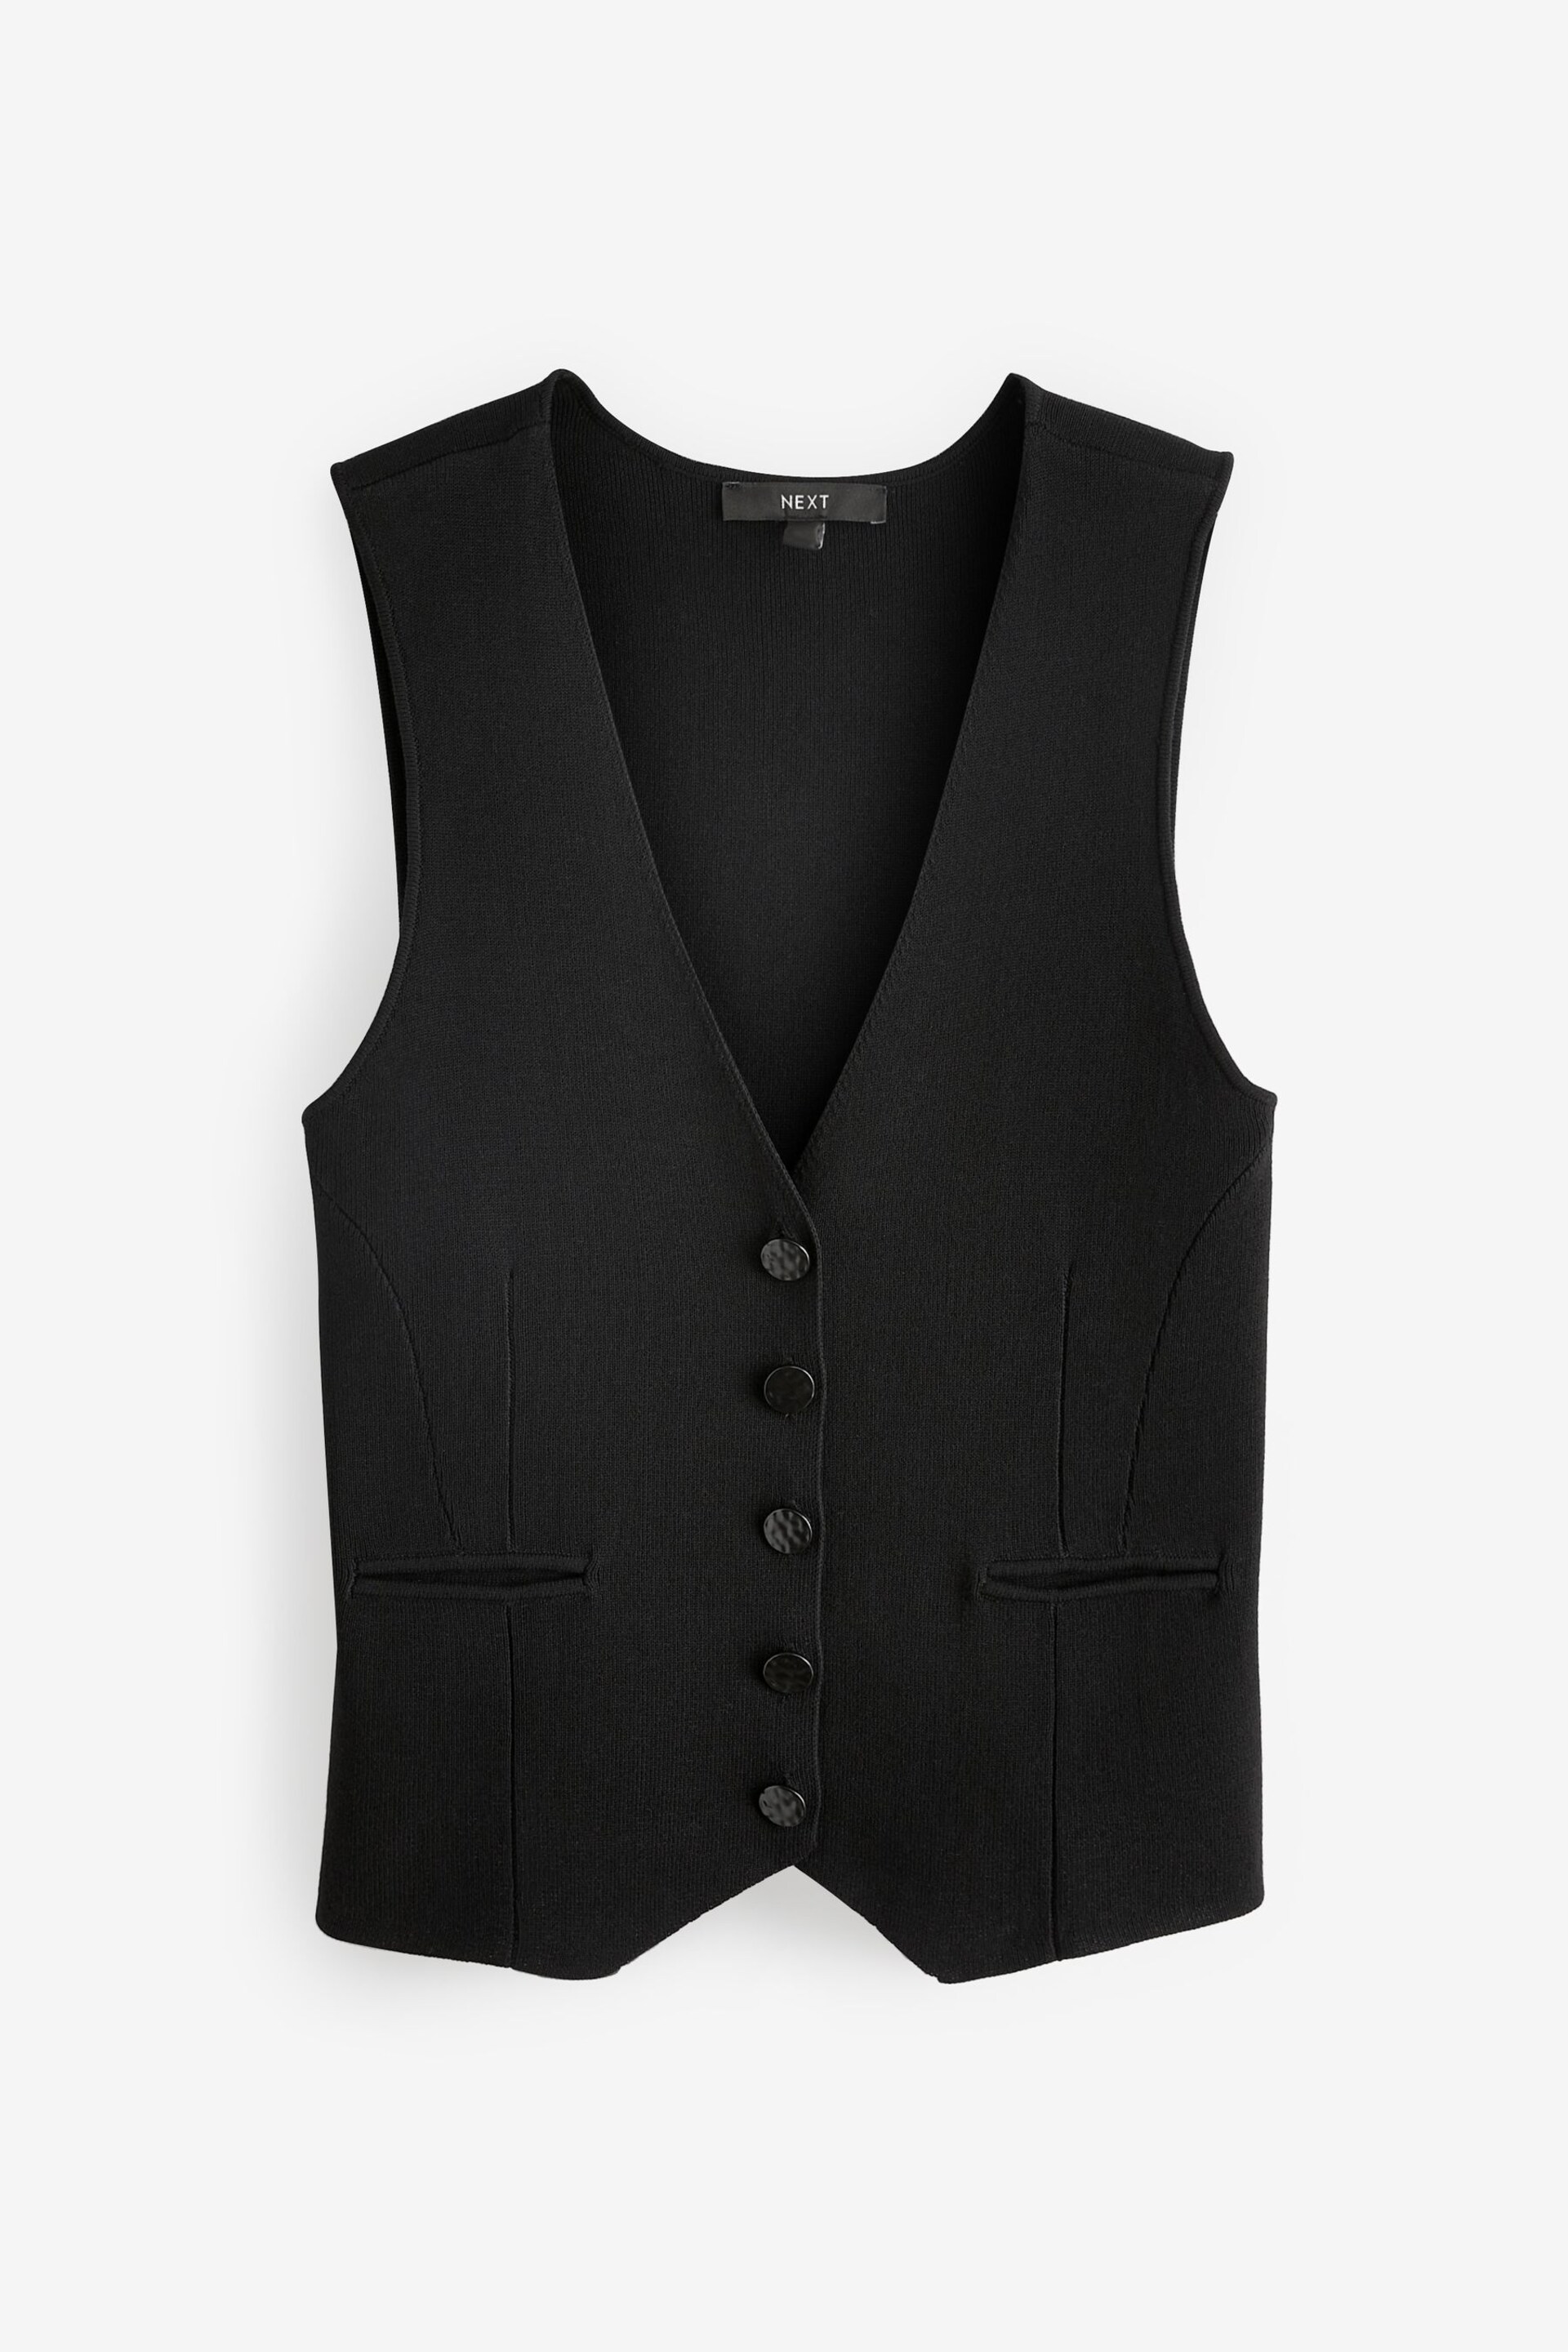 Black Button Through Knitted Waistcoat - Image 5 of 7